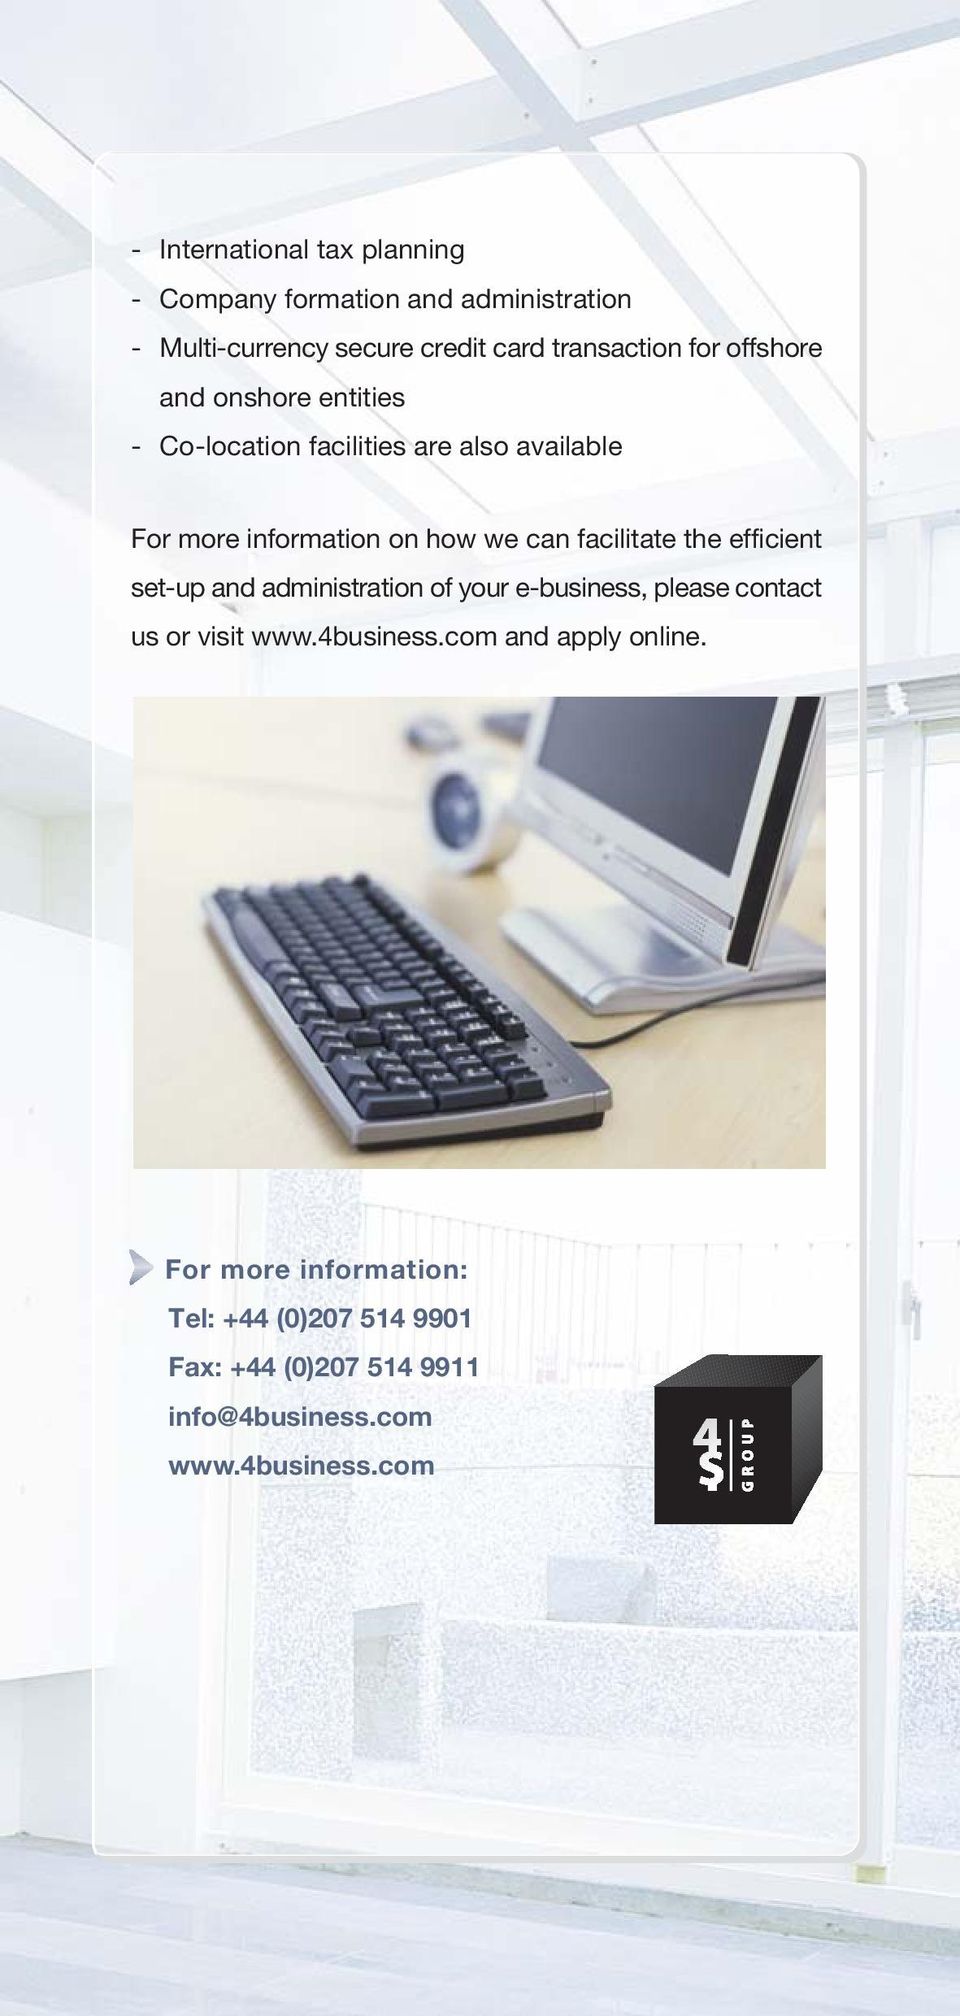 facilitate the efficient set-up and administration of your e-business, please contact us or visit www.4business.